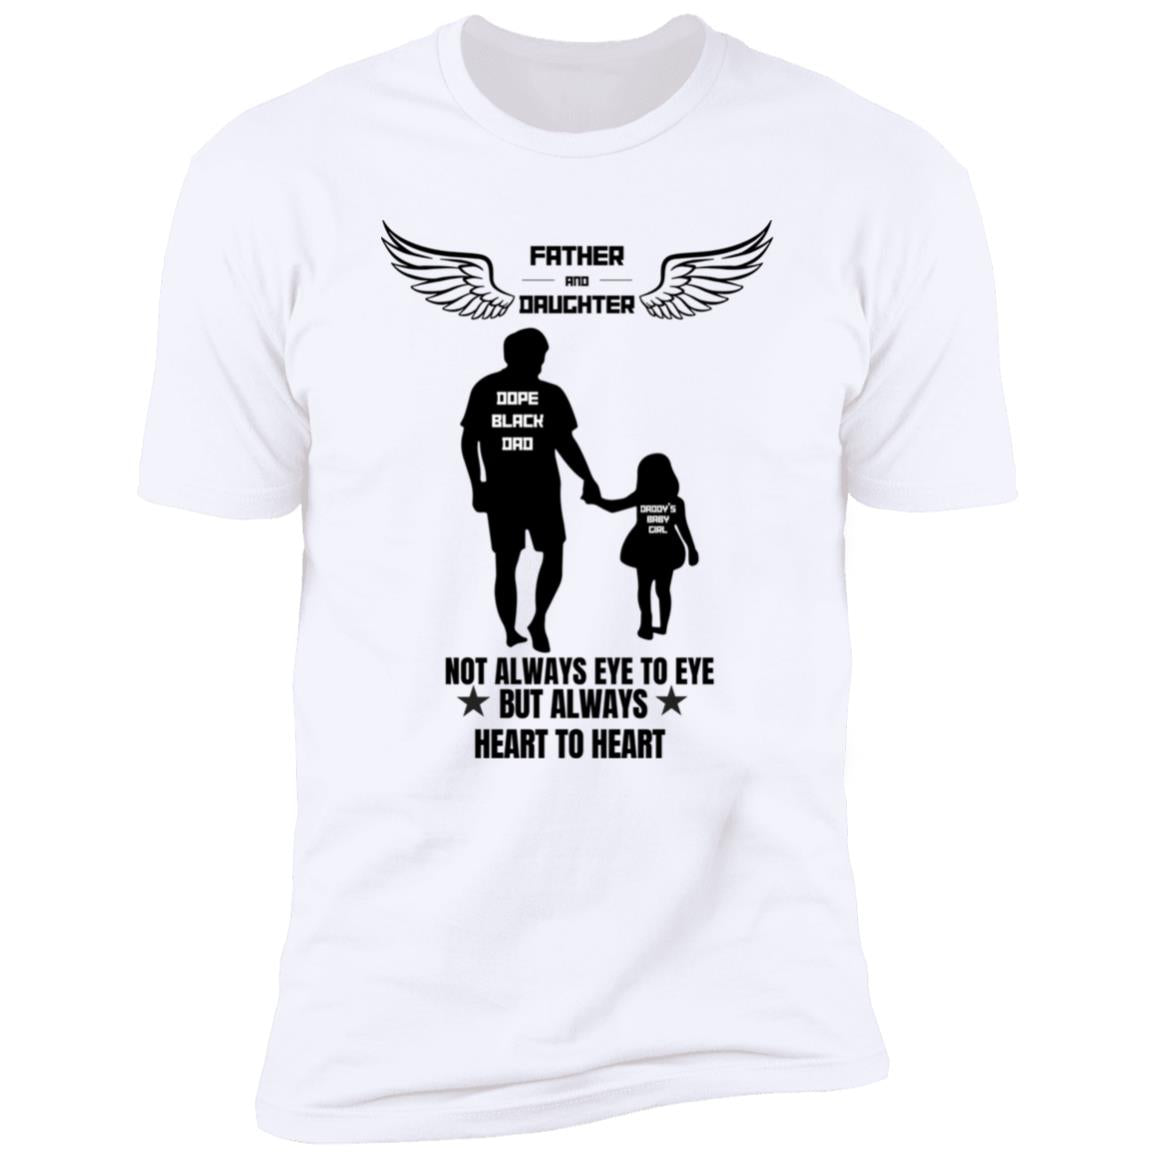 FATHER & DAUGHTER LOVE T SHIRT